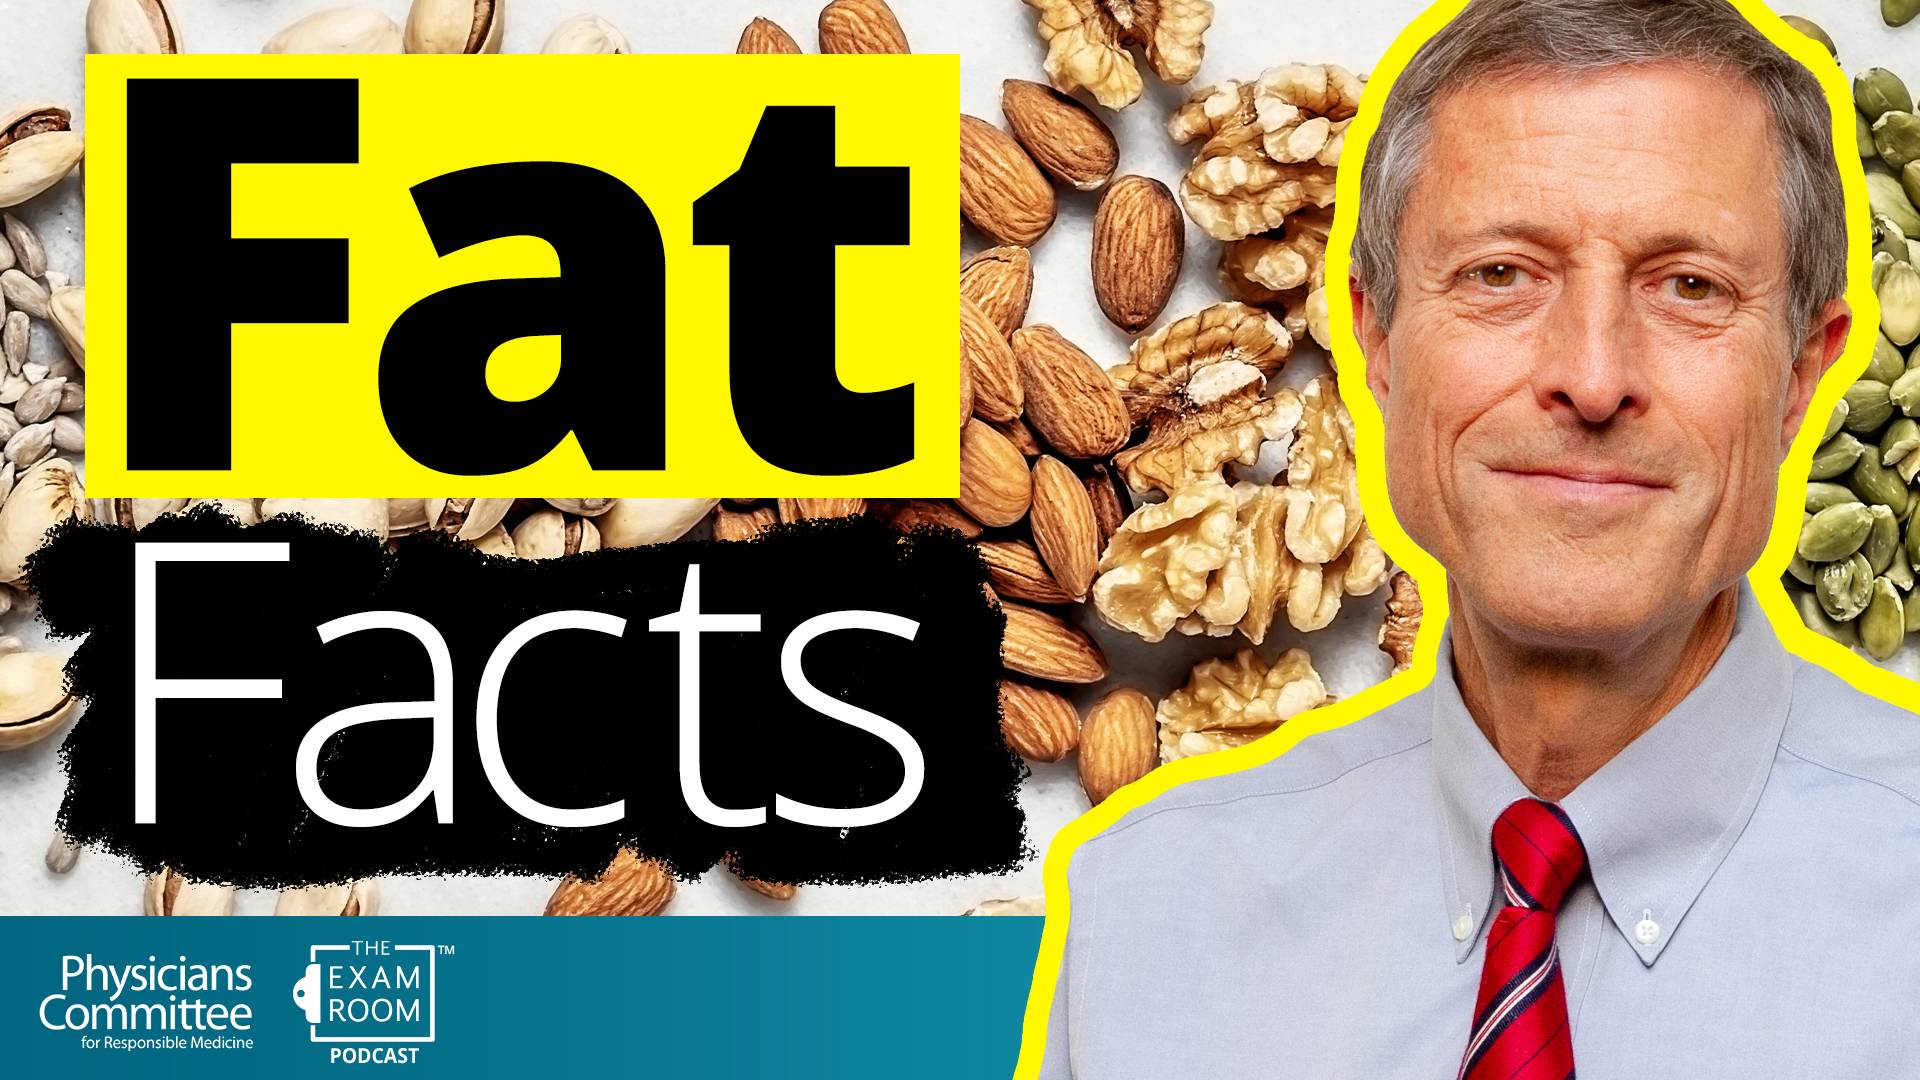 Healthy Fat: How Much Is Too Much and Other Fat Facts | Dr. Neal Barnard Live Q&A